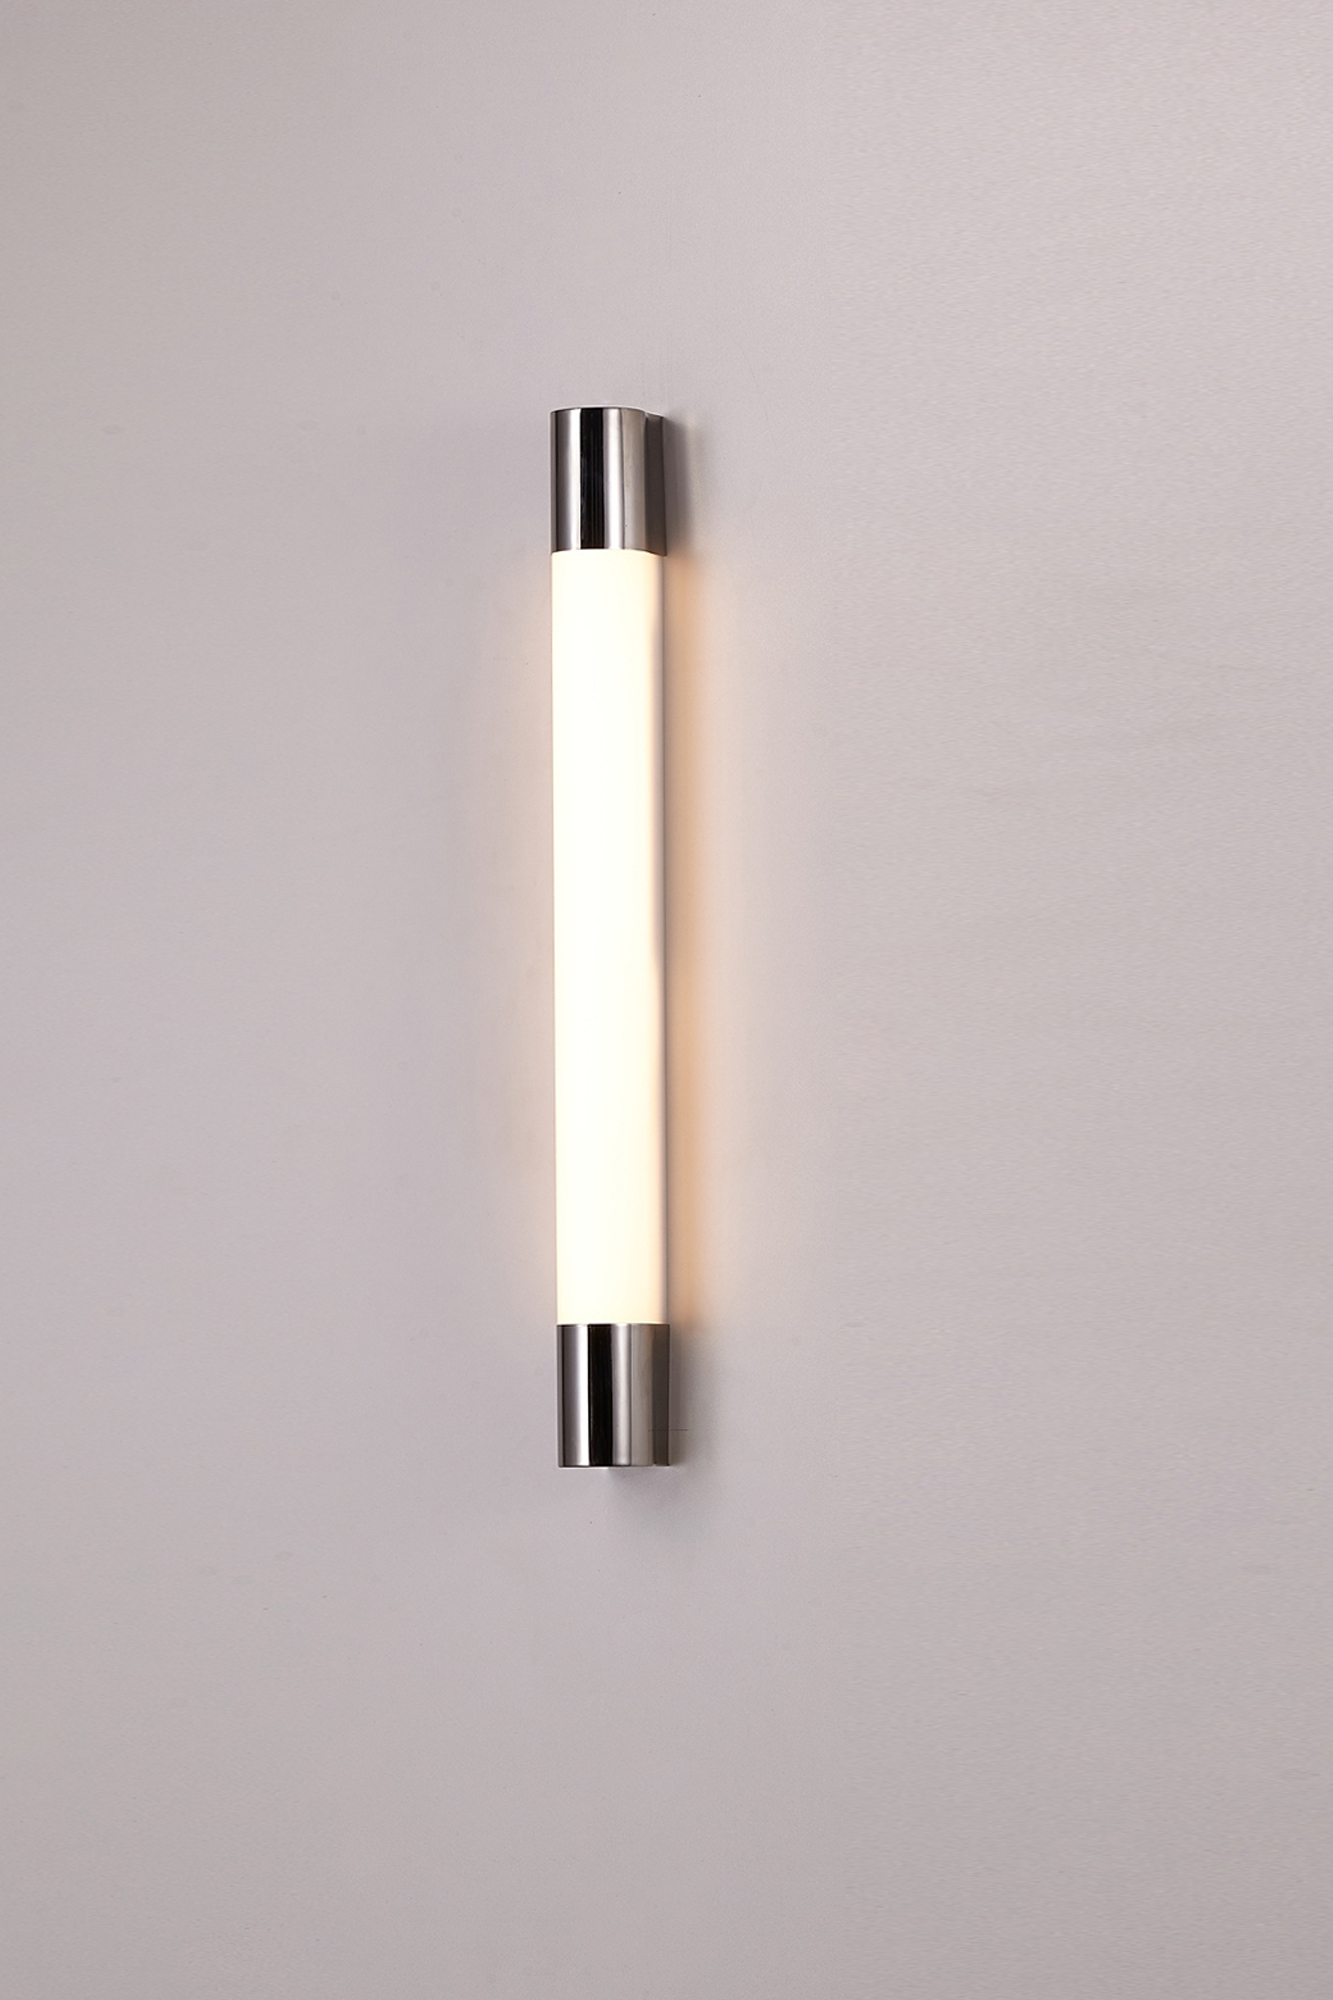 Innervation 1730 |Wall Lamp